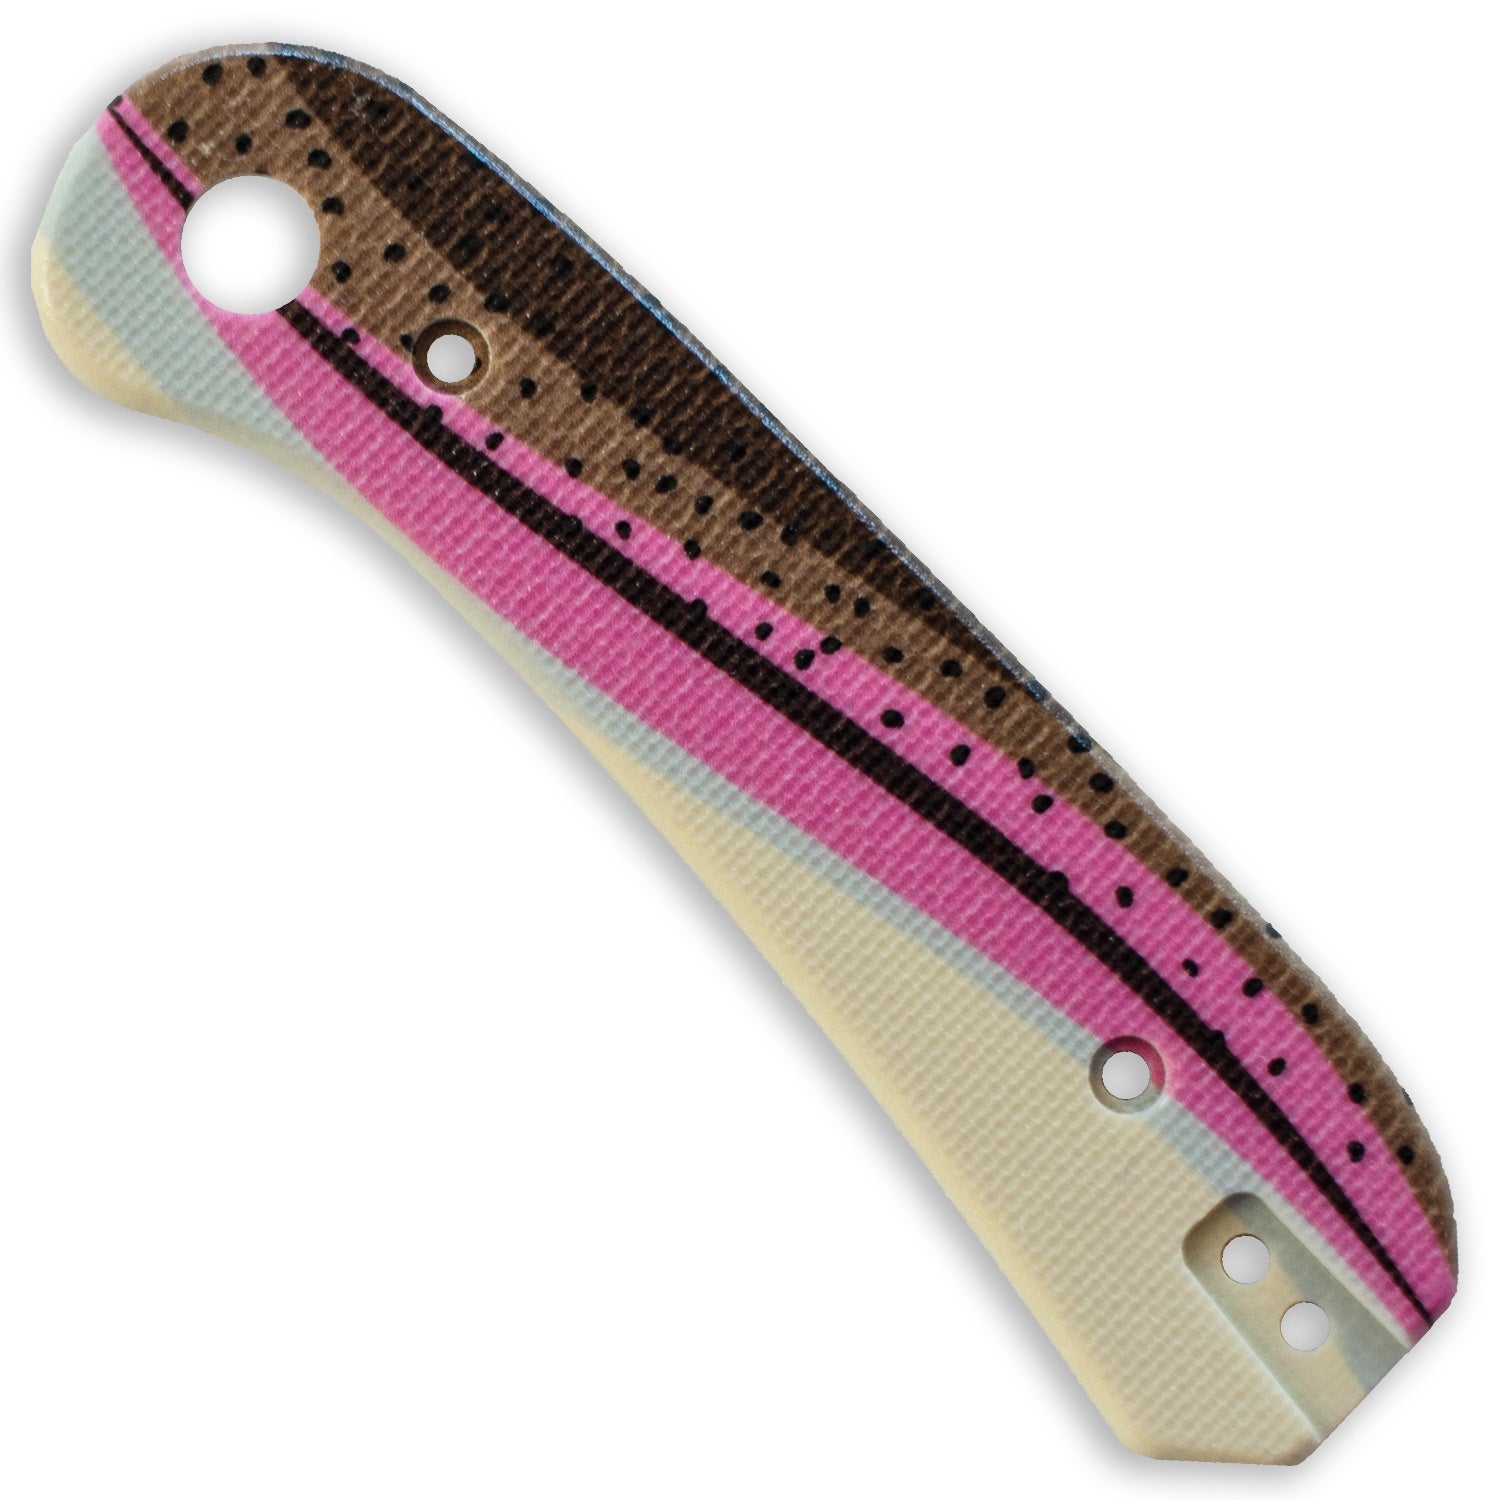 Lander 1 Knife Scales - Rainbow Trout G10